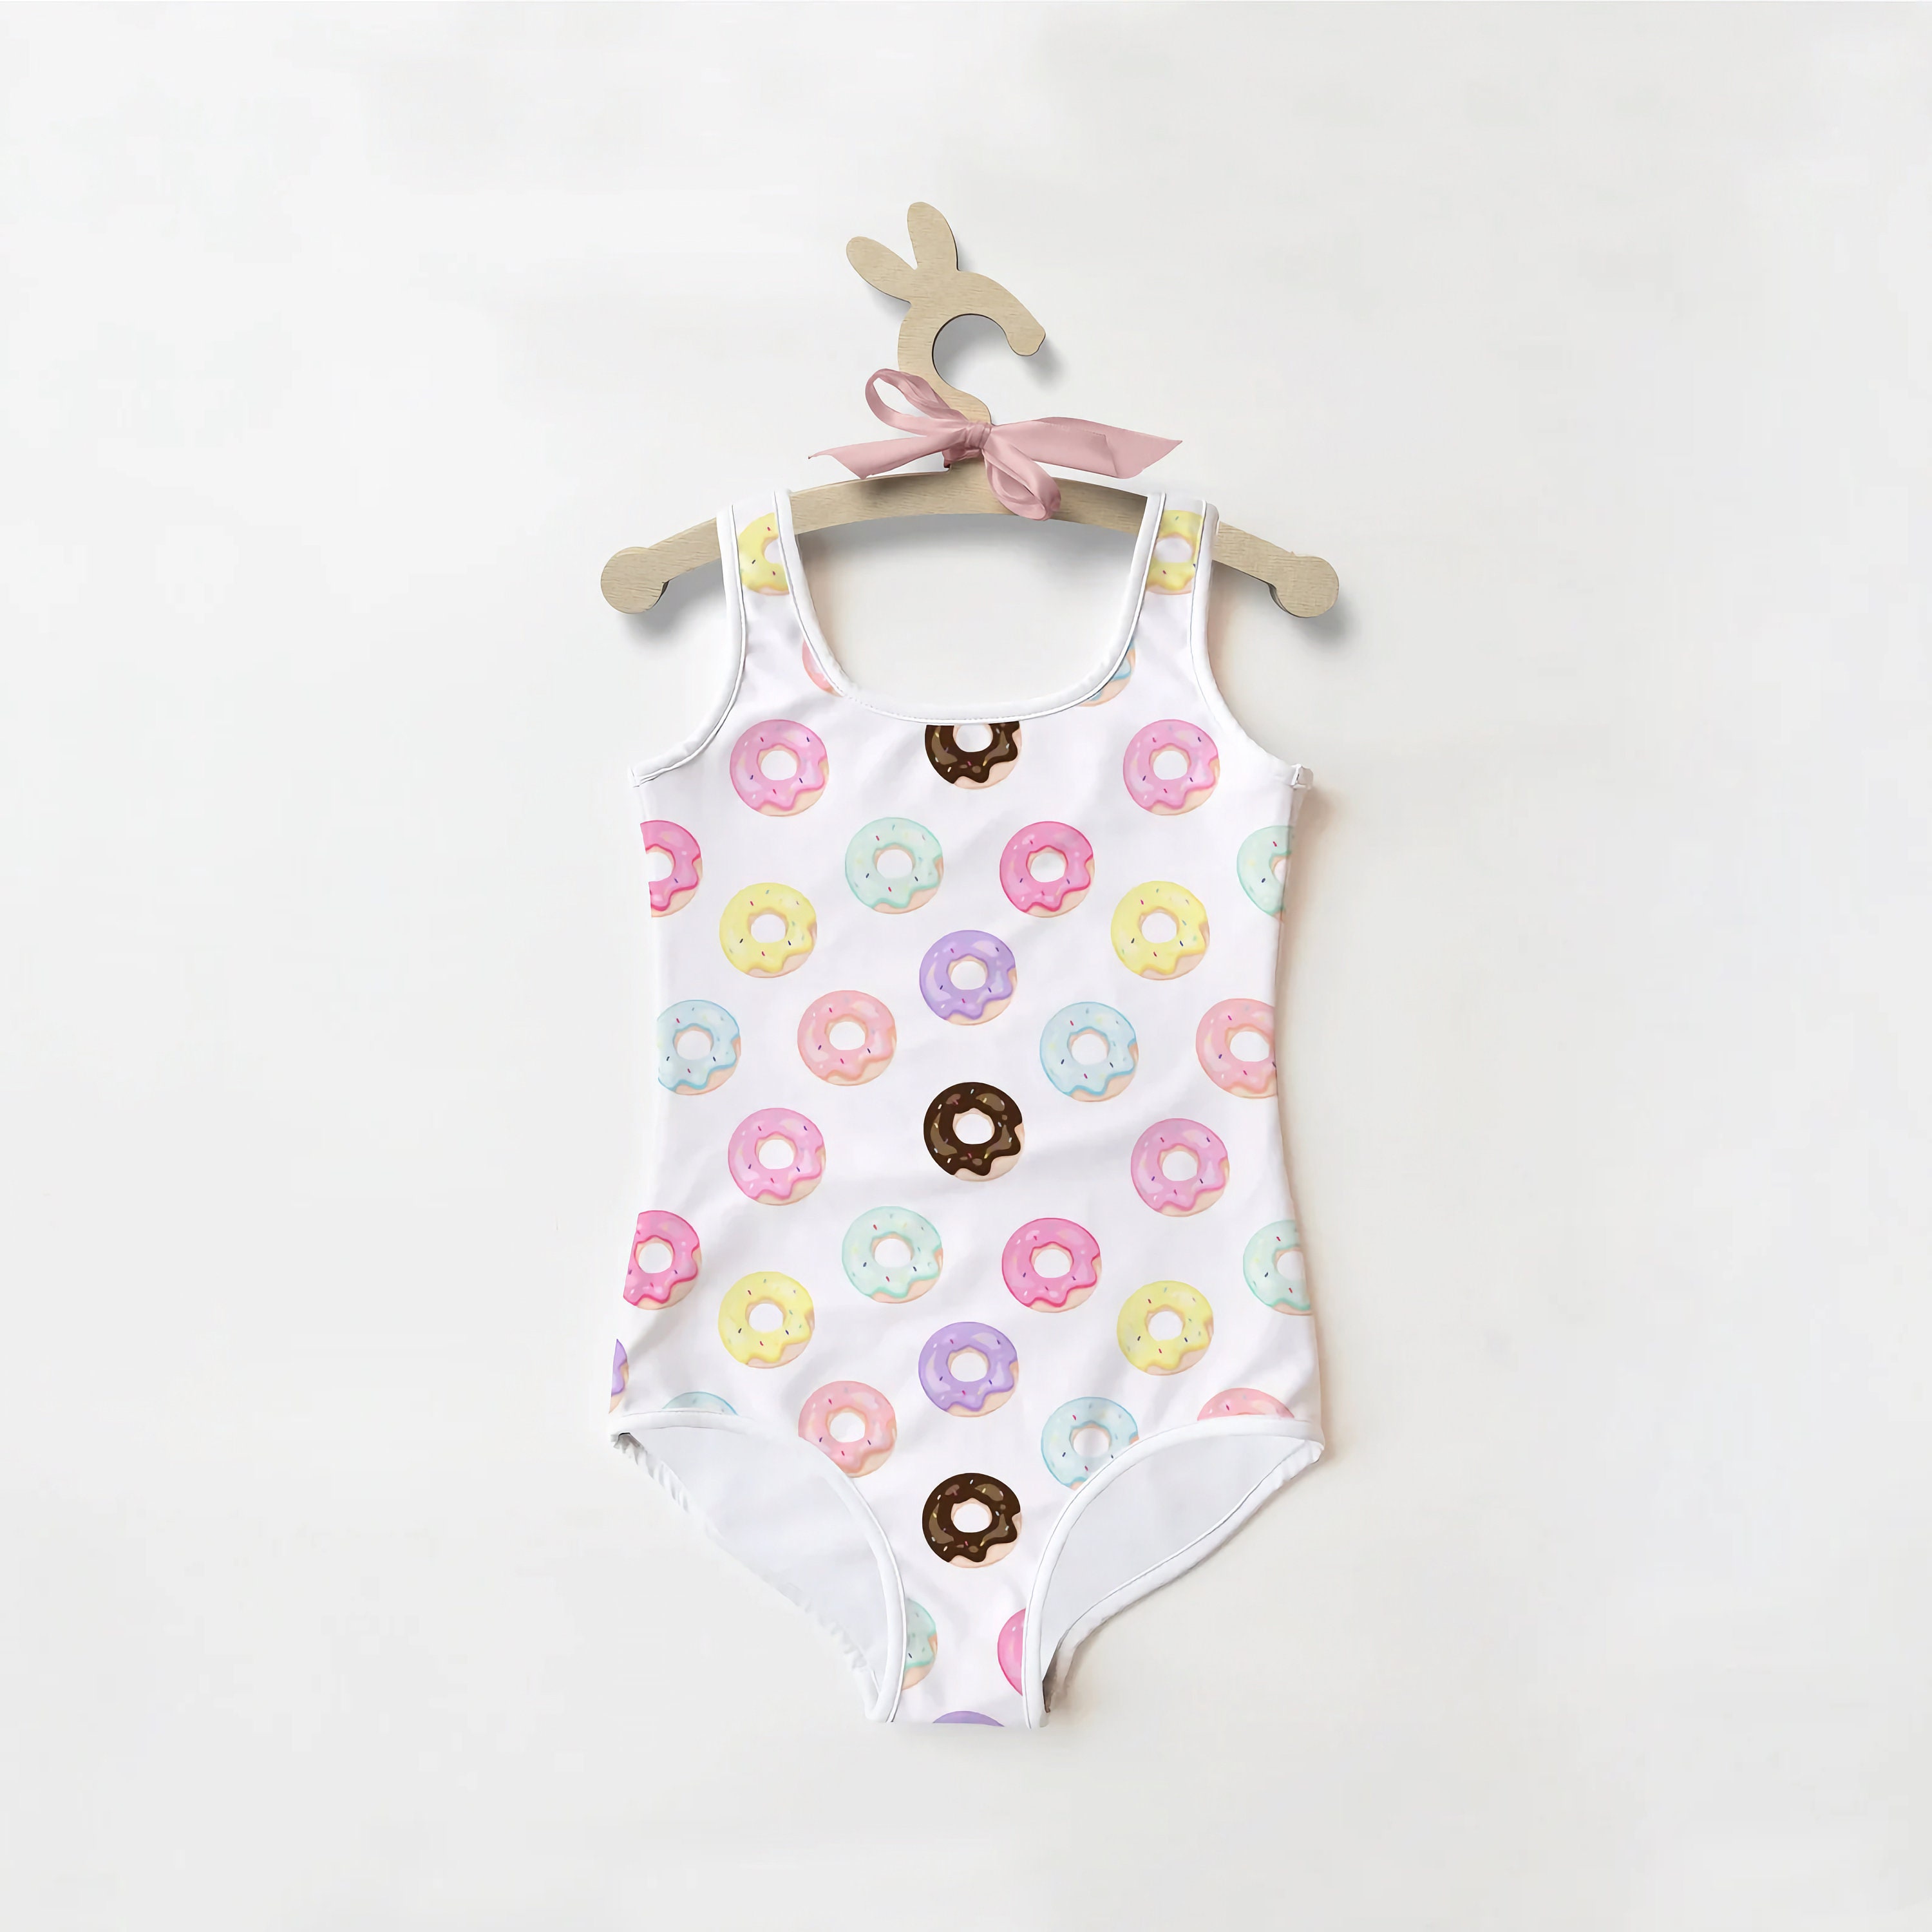 Girls Donuts Swimsuit